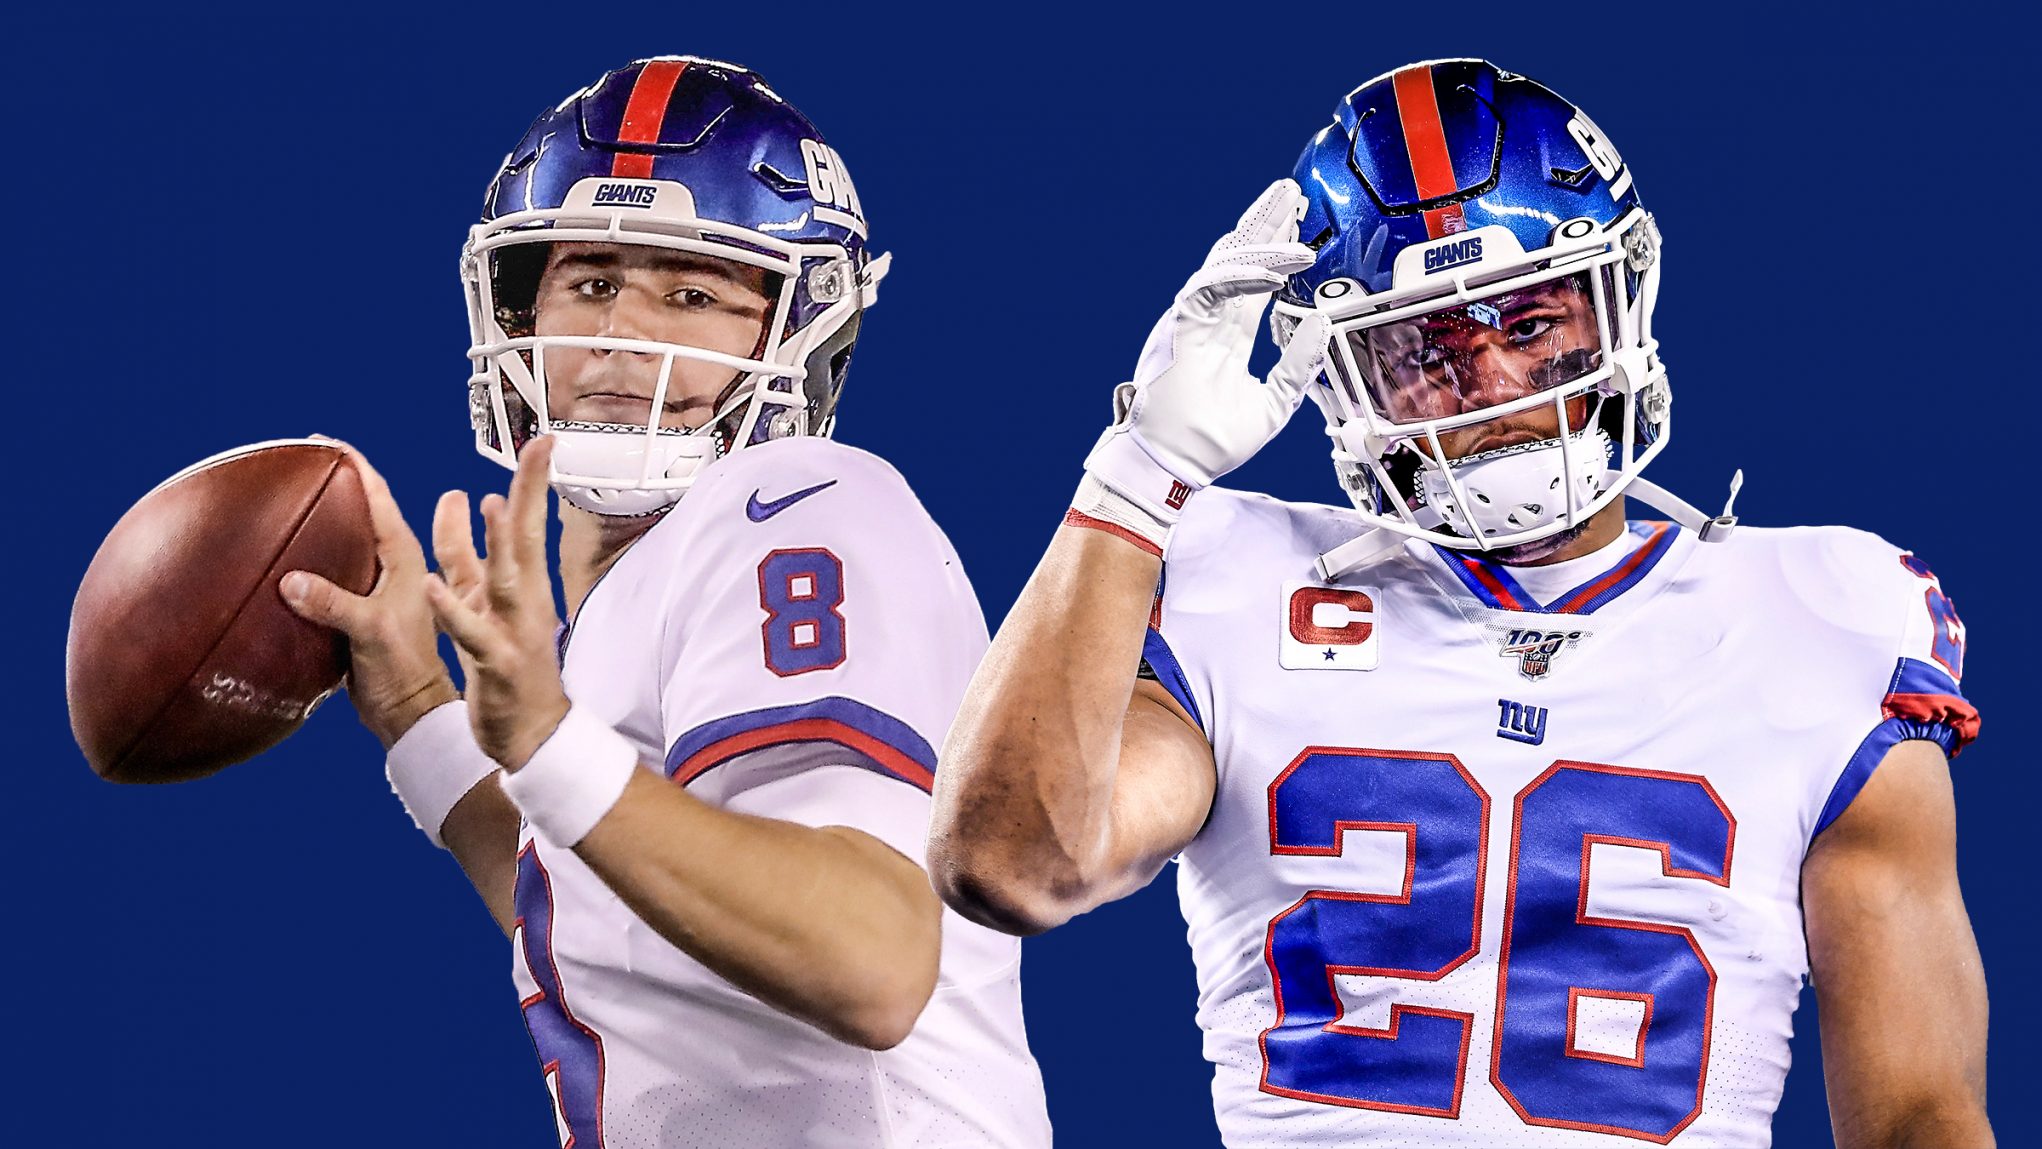 New York Giants' retro-white uniforms are nice, but should remain